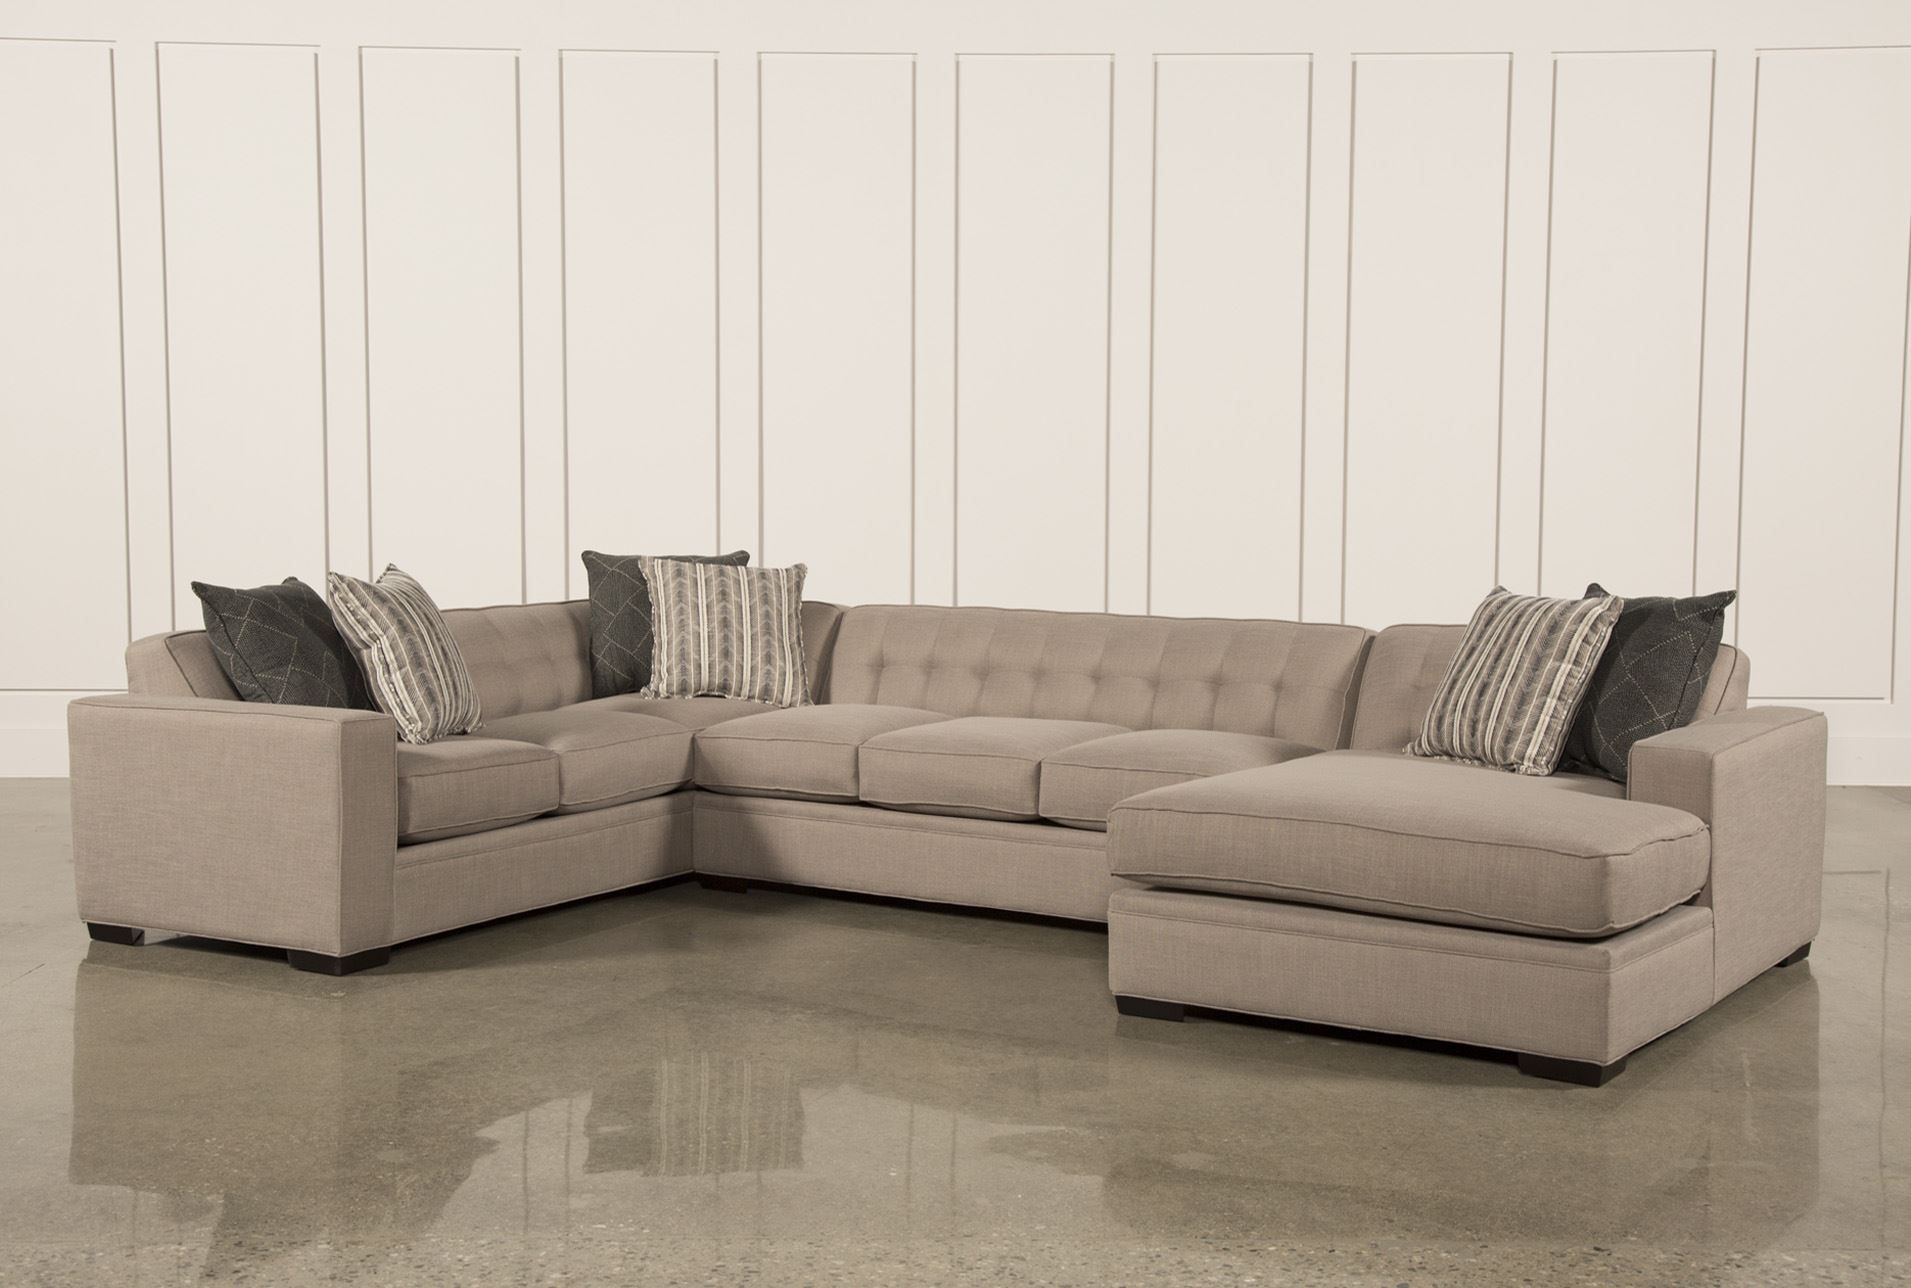 Corbin 3 Piece Sectional W/raf Chaise | New House: Loft | Pinterest Within Norfolk Grey 6 Piece Sectionals With Laf Chaise (View 5 of 30)